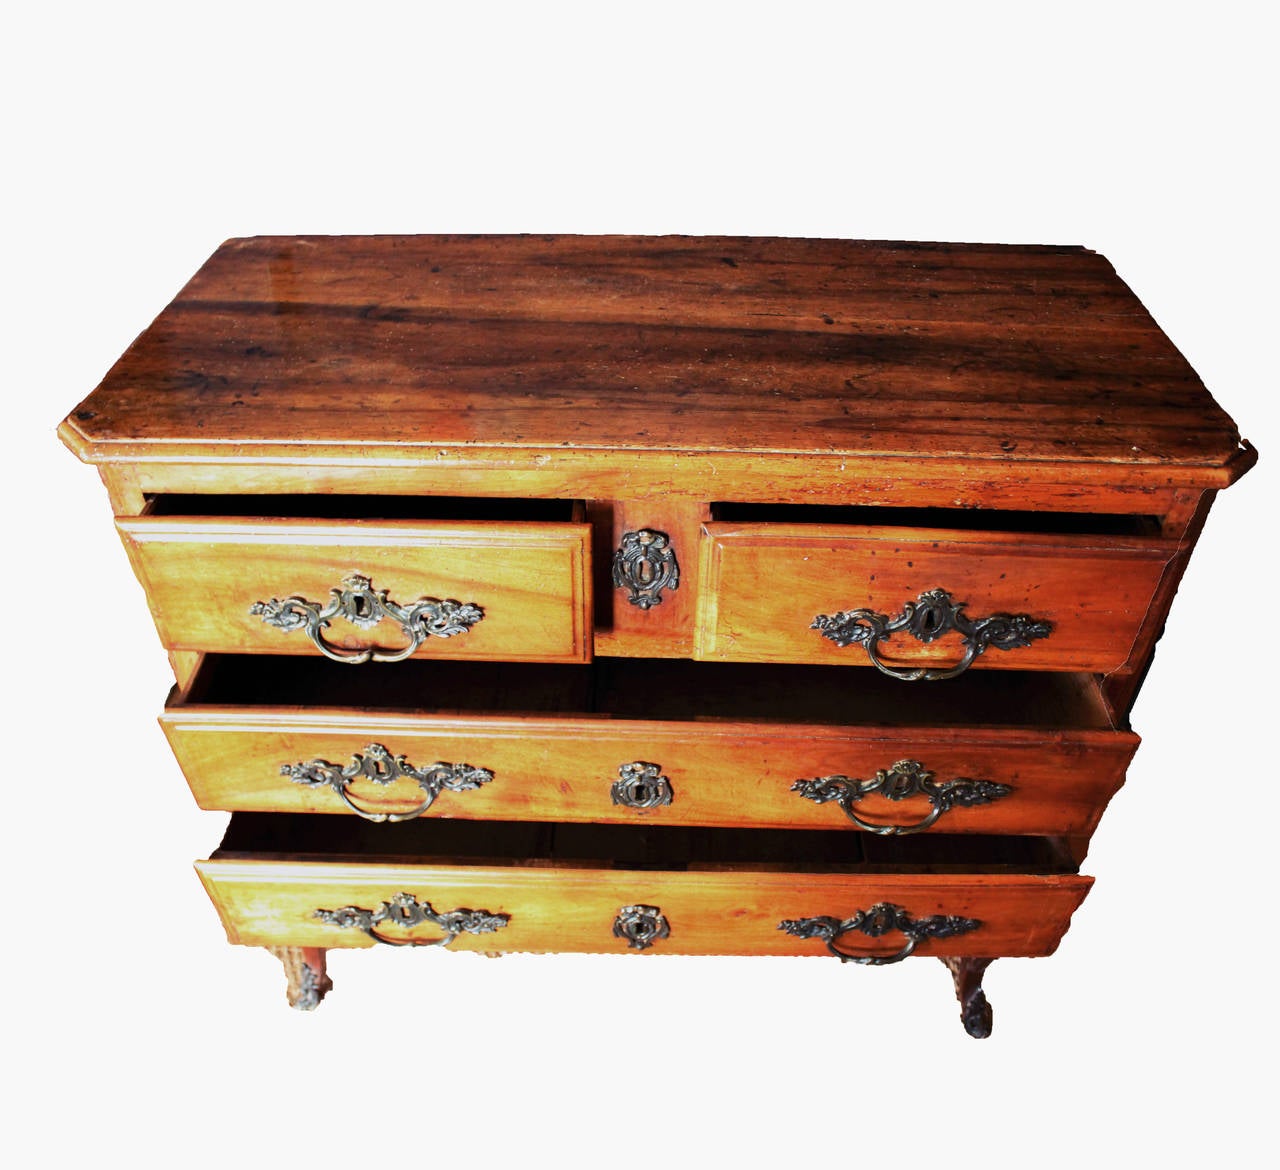 Rustic feminine French walnut commode on raised legs that are hand carved. Features four drawers, original hand forged bronze pulls and bow motif escutcheons.